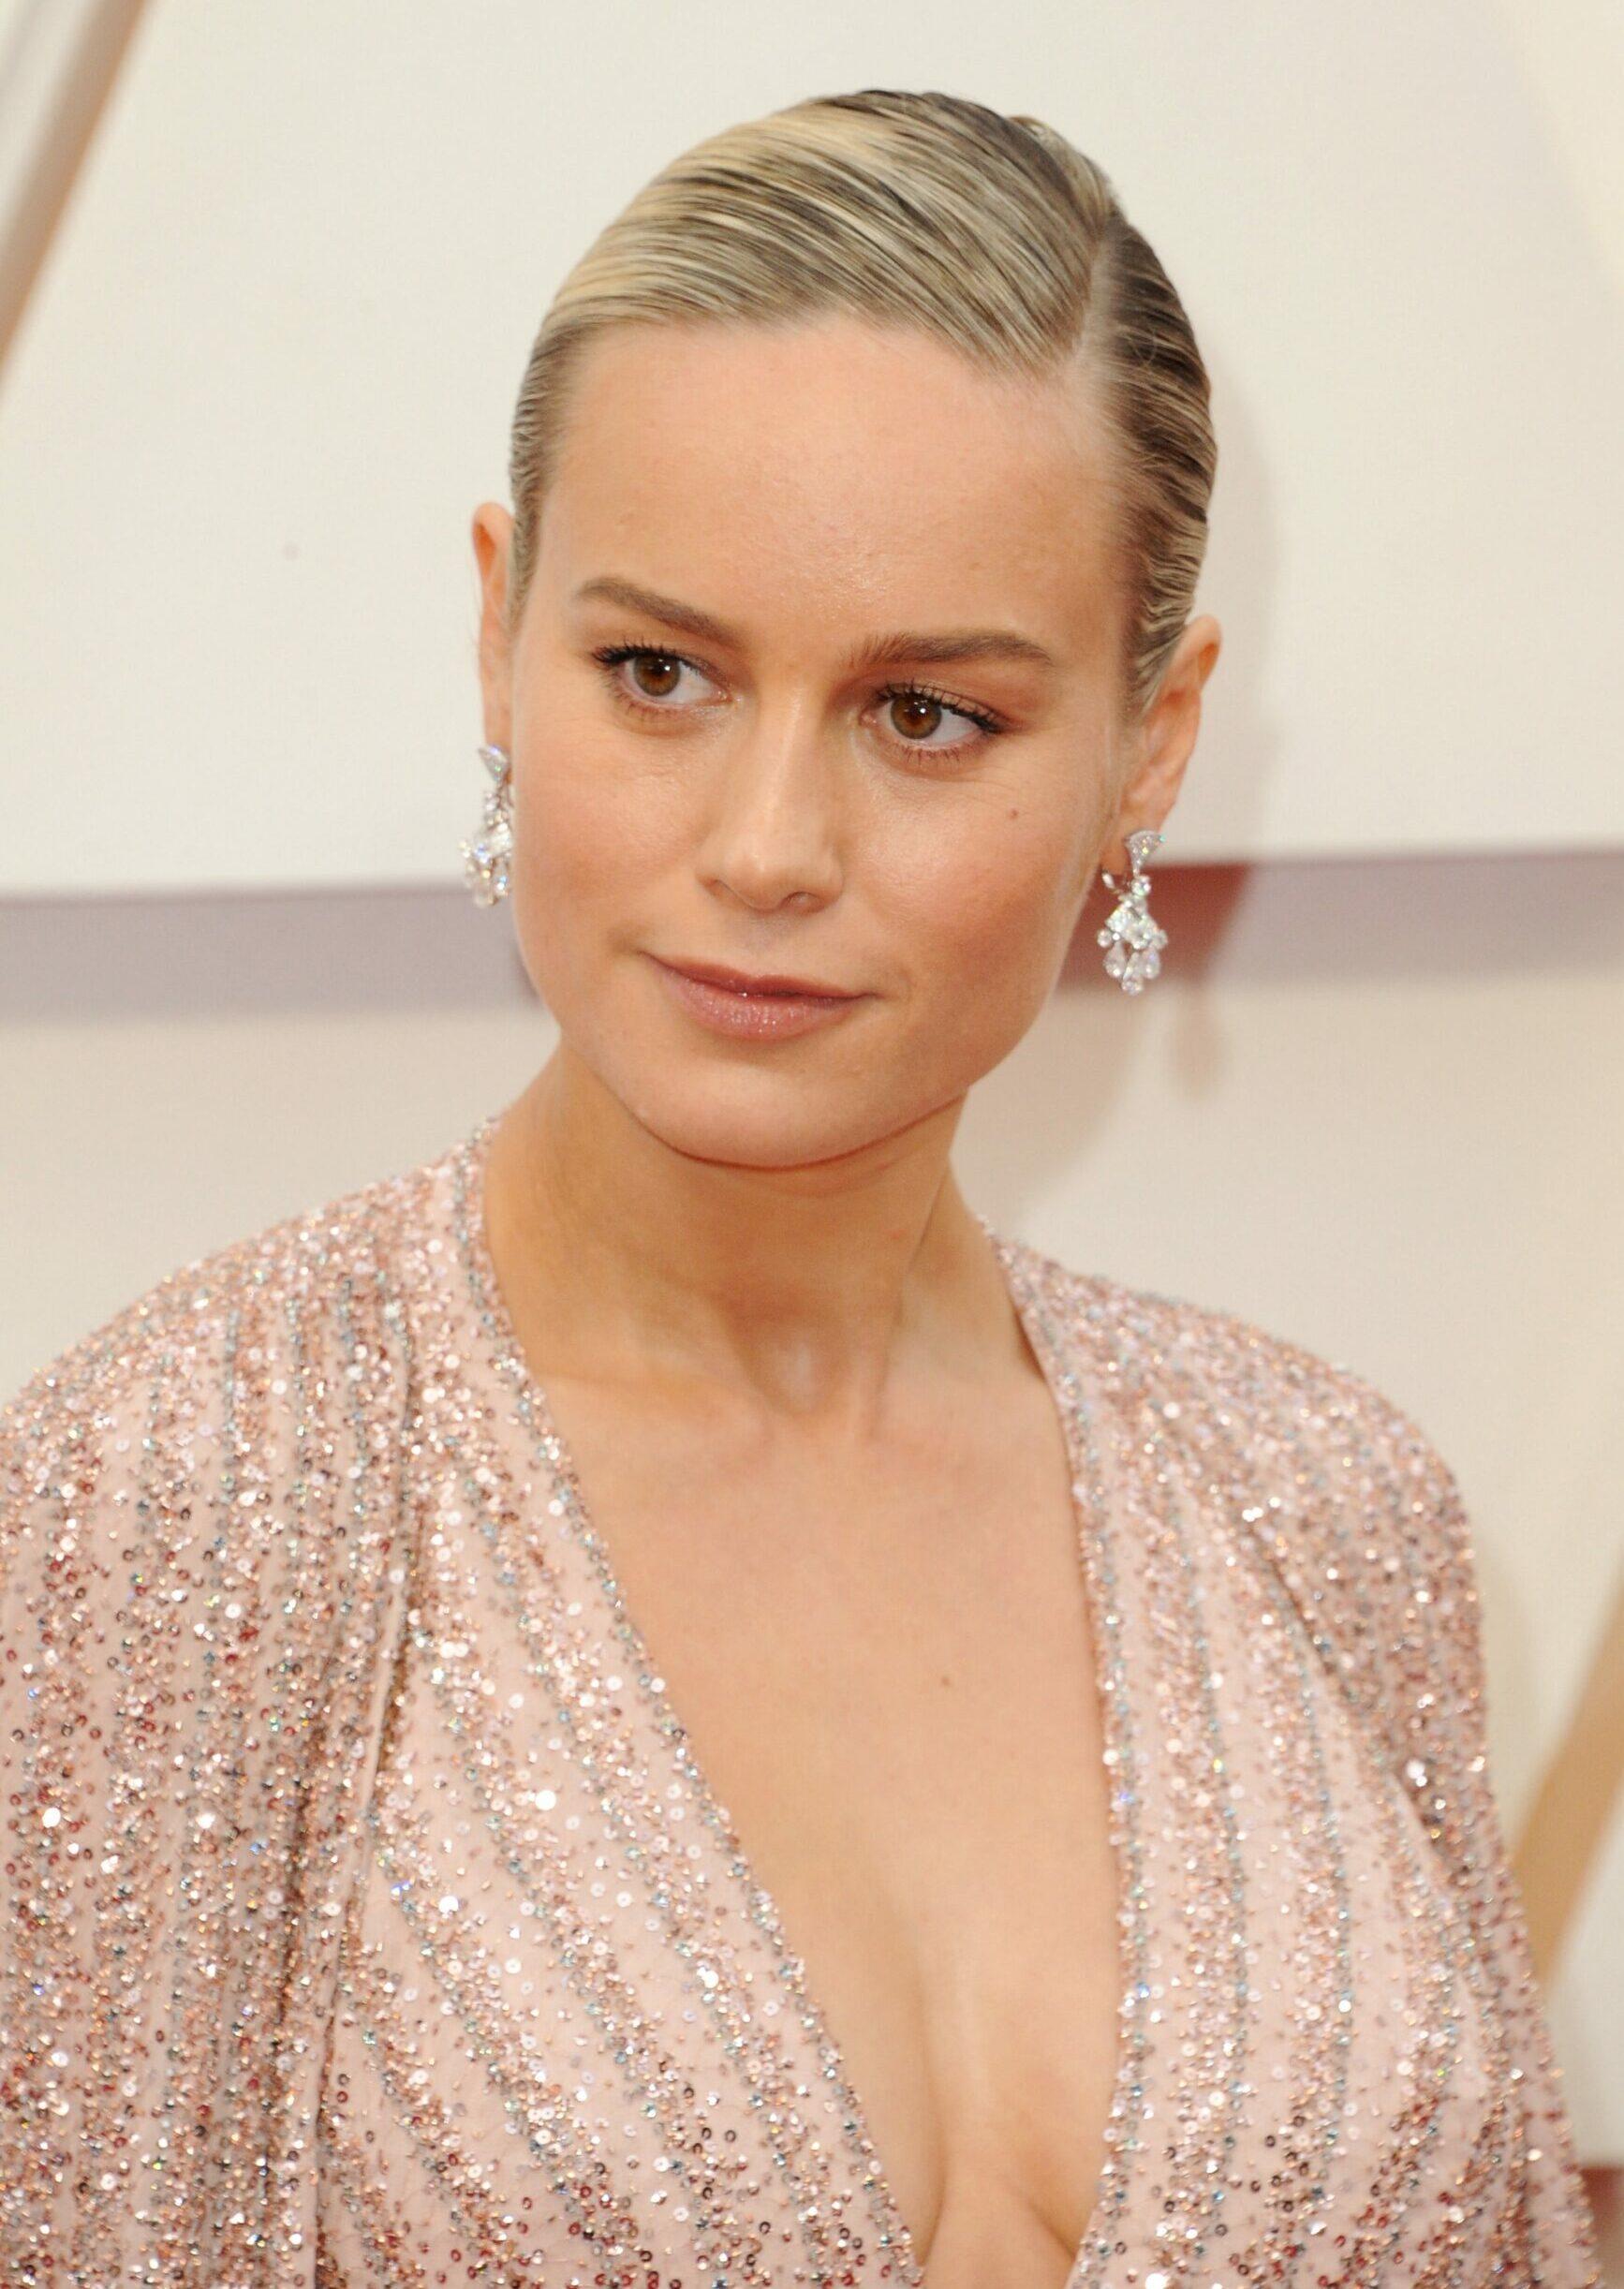 Brie Larson at the 92nd Academy Awards